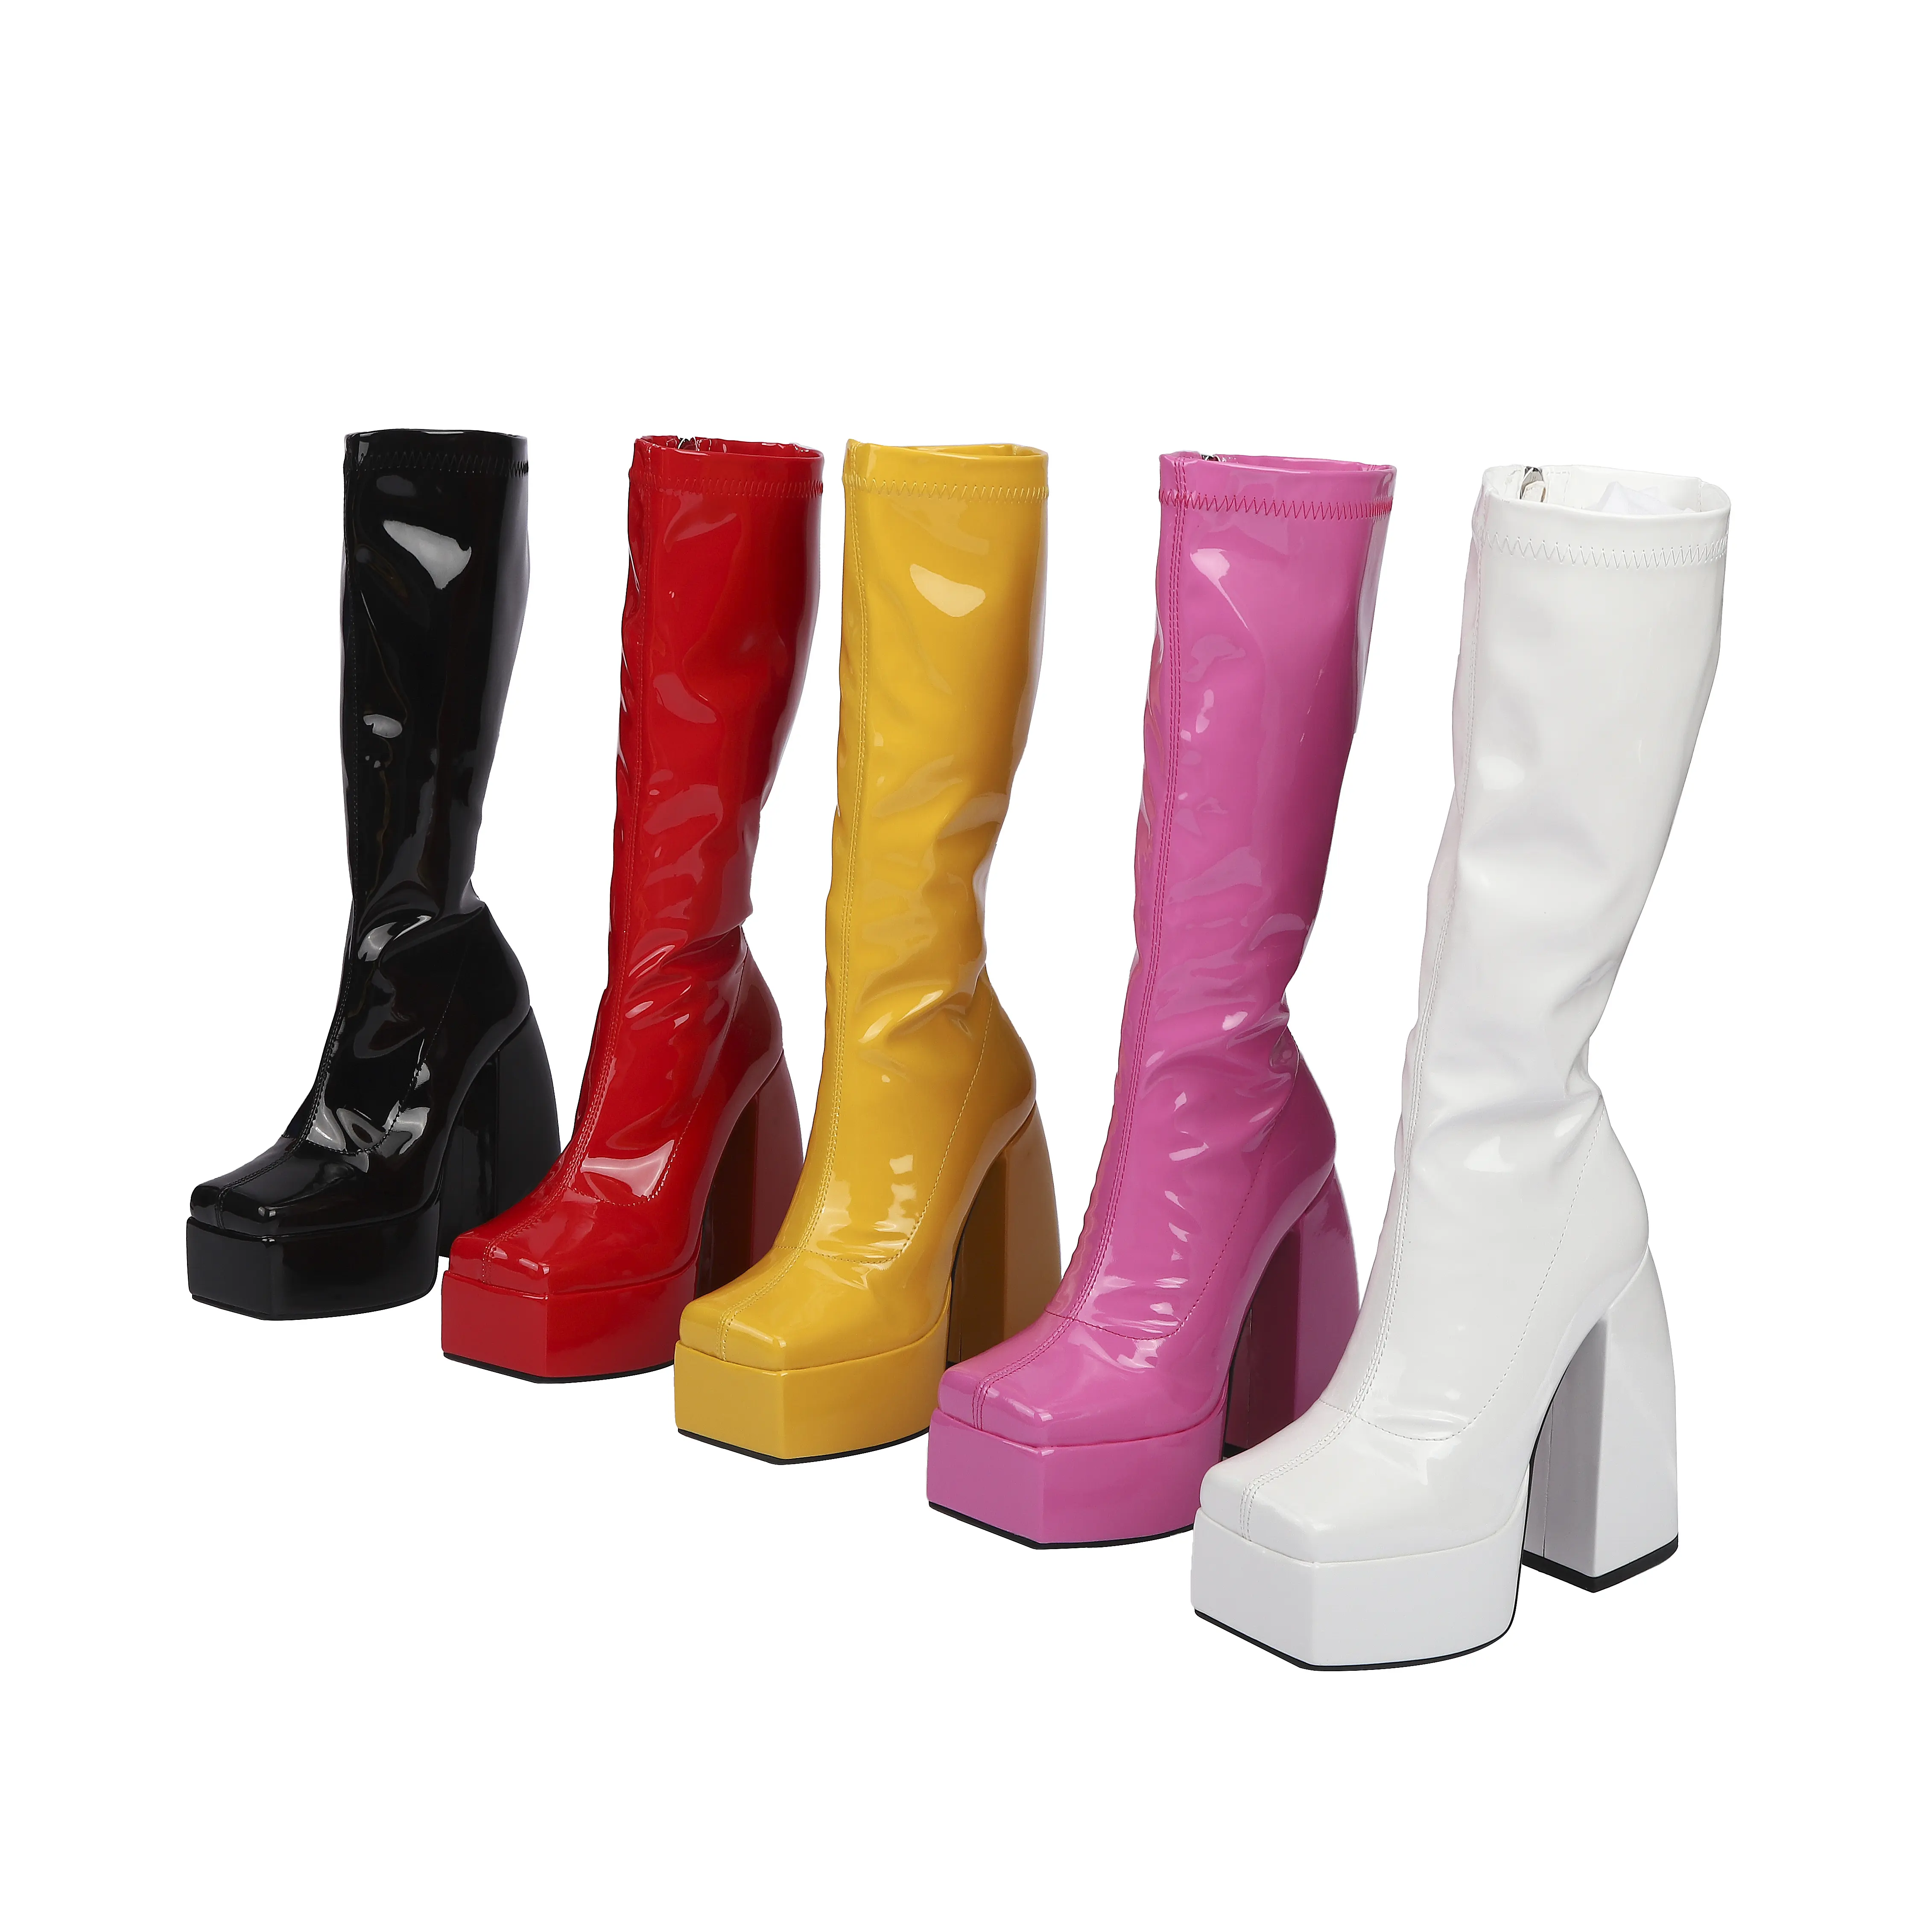 Promotional High Quality White Women Knee Luxury High Heel Boots Platform Glossy Leather Candy Color Shoes Chunky Heel Designer